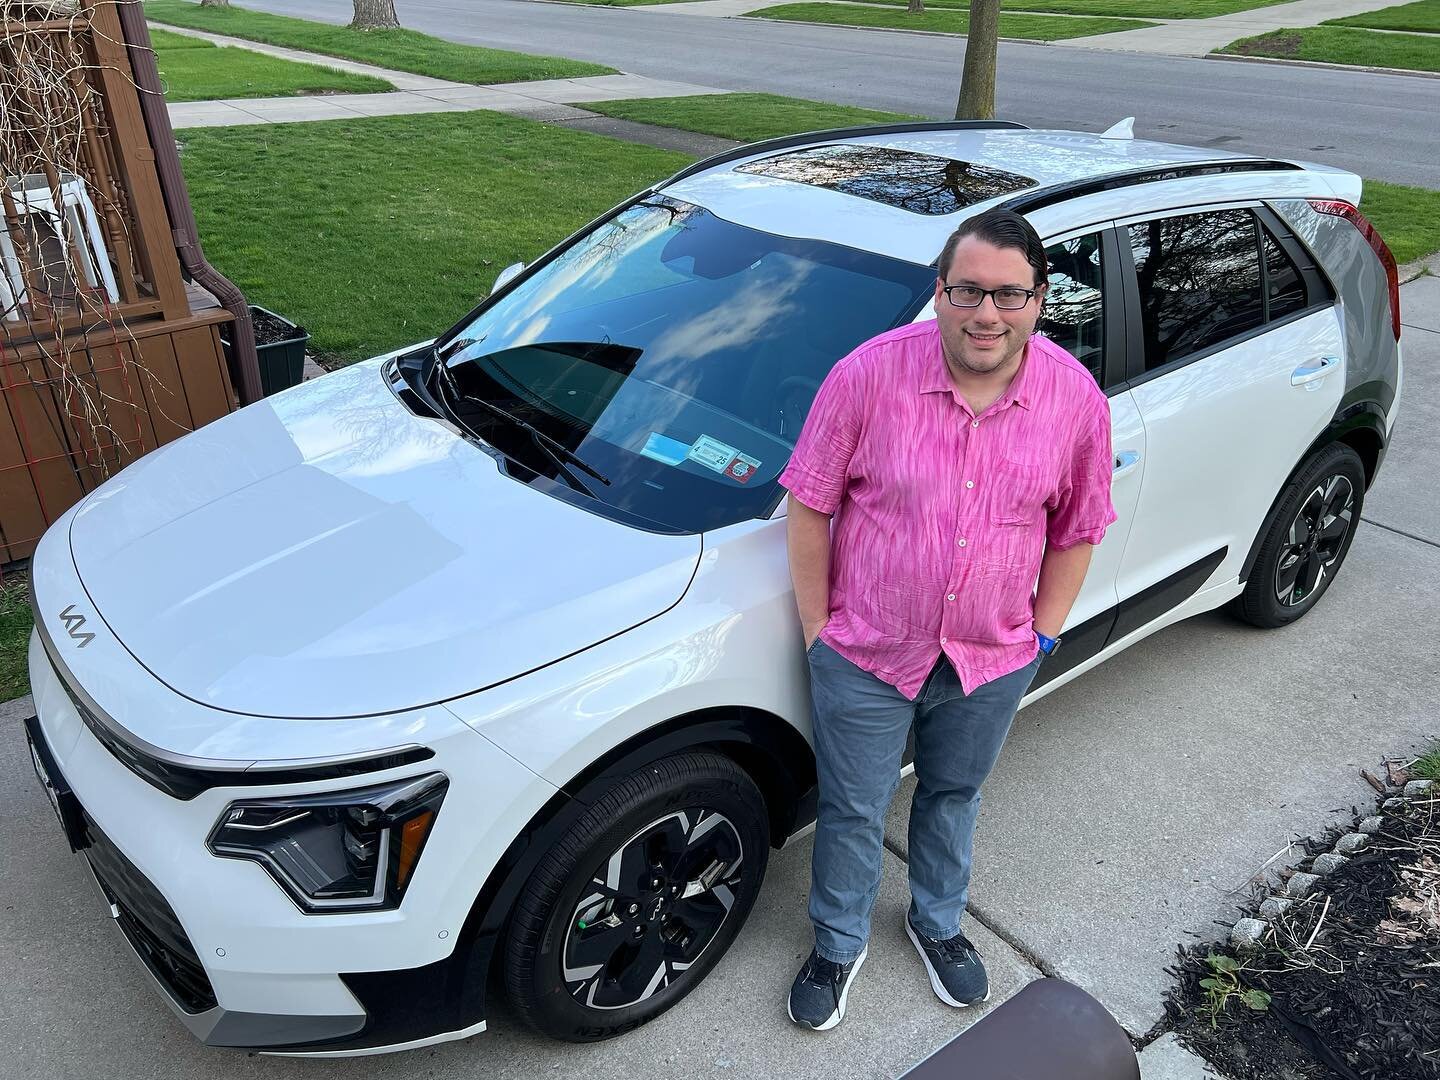 &ldquo;When I came to Le Car I knew I was ready to go full electric but I had no idea where to begin with so many radically different options marketed in vastly different ways. There was such a wide array of brands, body types, and price ranges to ch